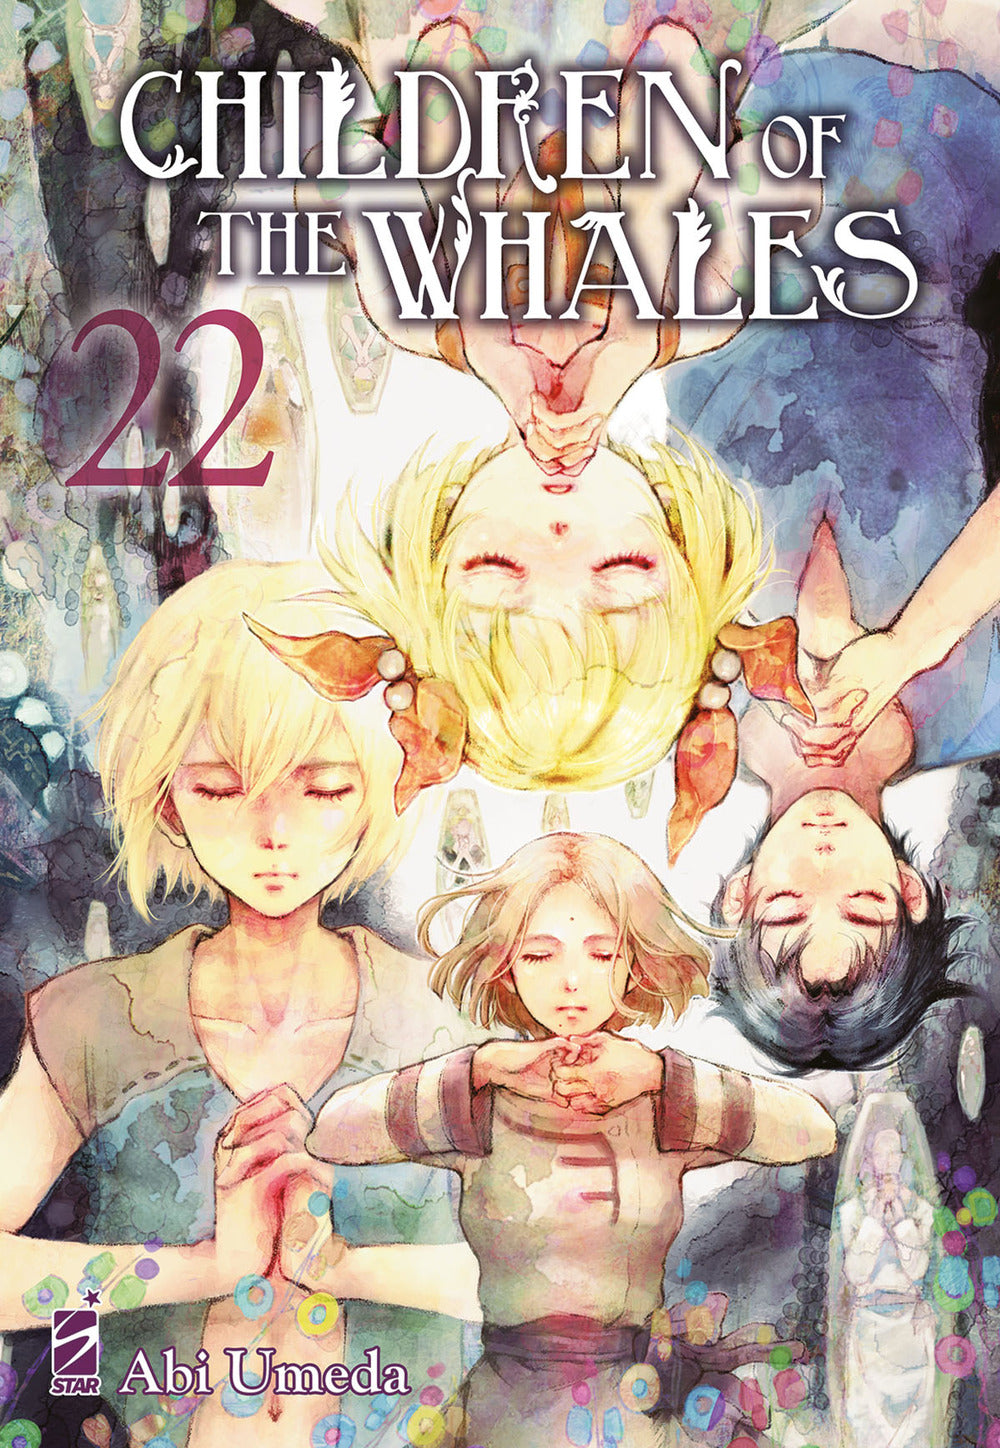 Children of the whales. Vol. 22